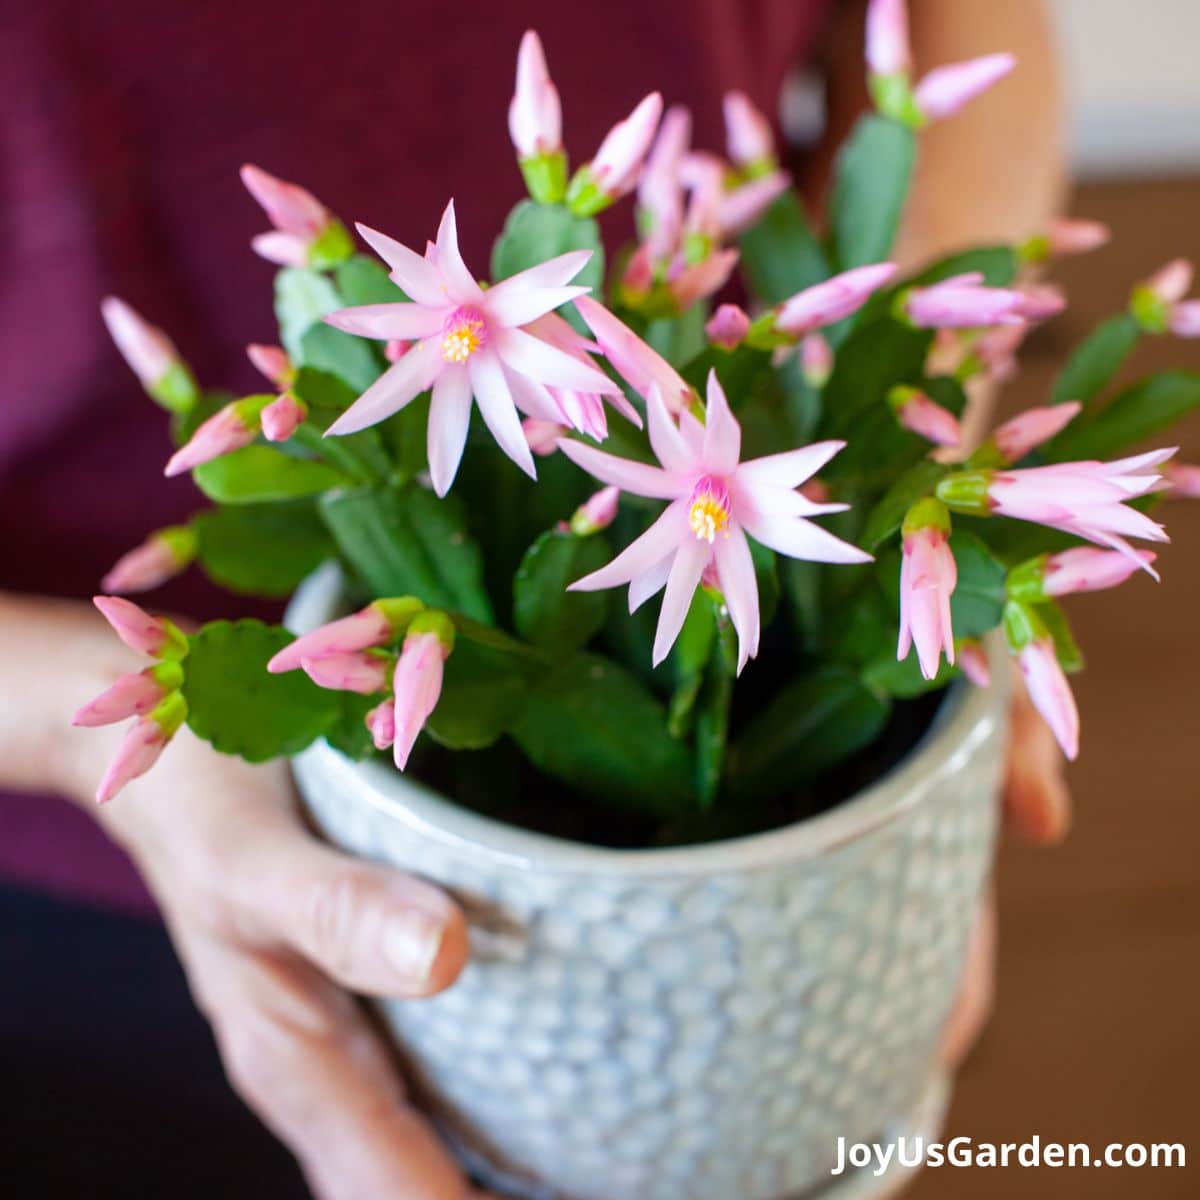 Pink easter cactus in bloom nell foster holding pot. 